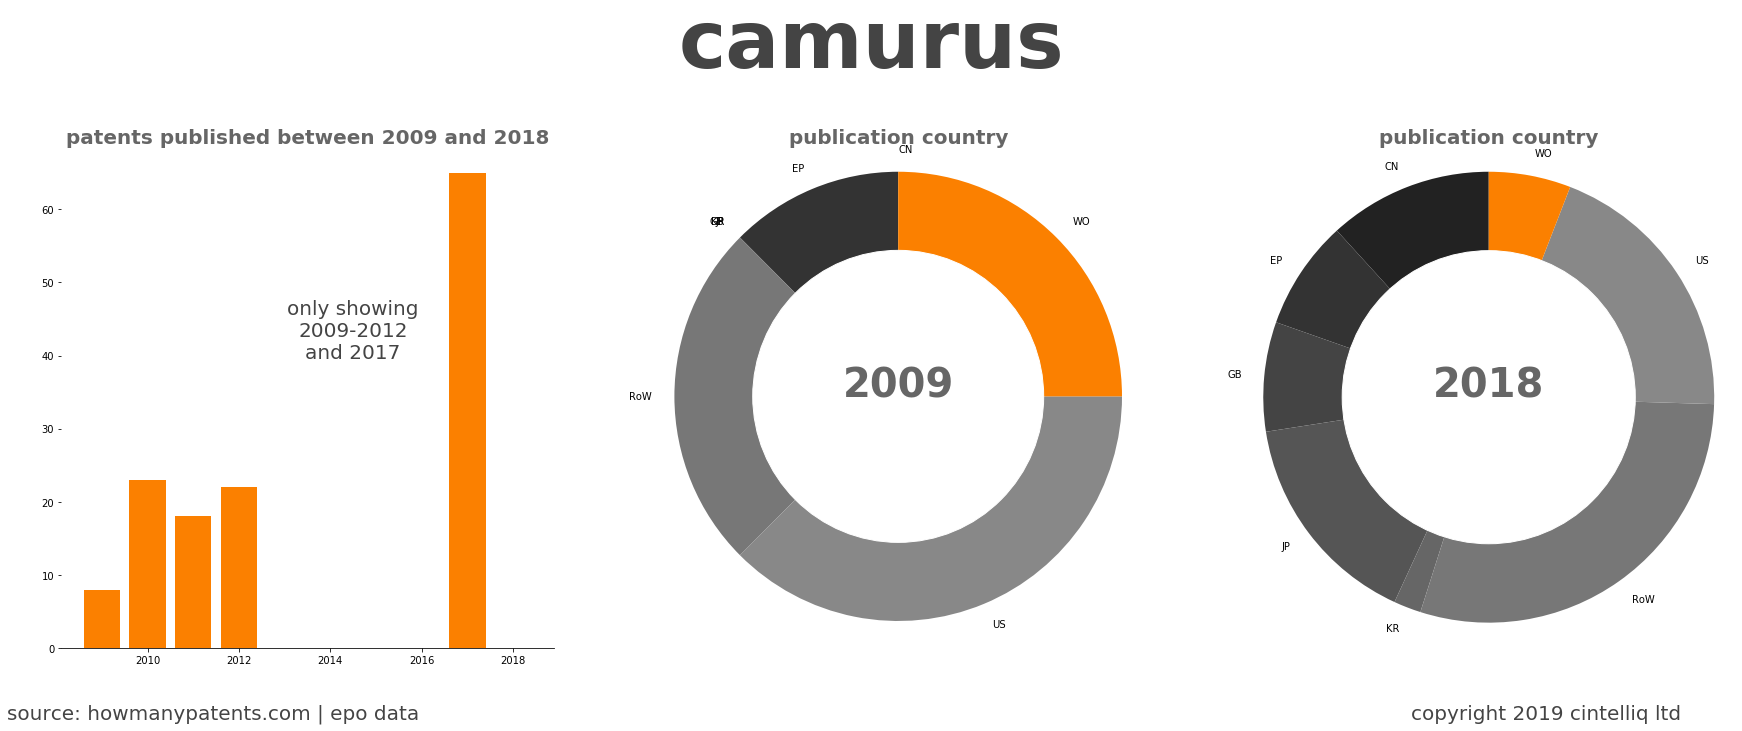 summary of patents for Camurus